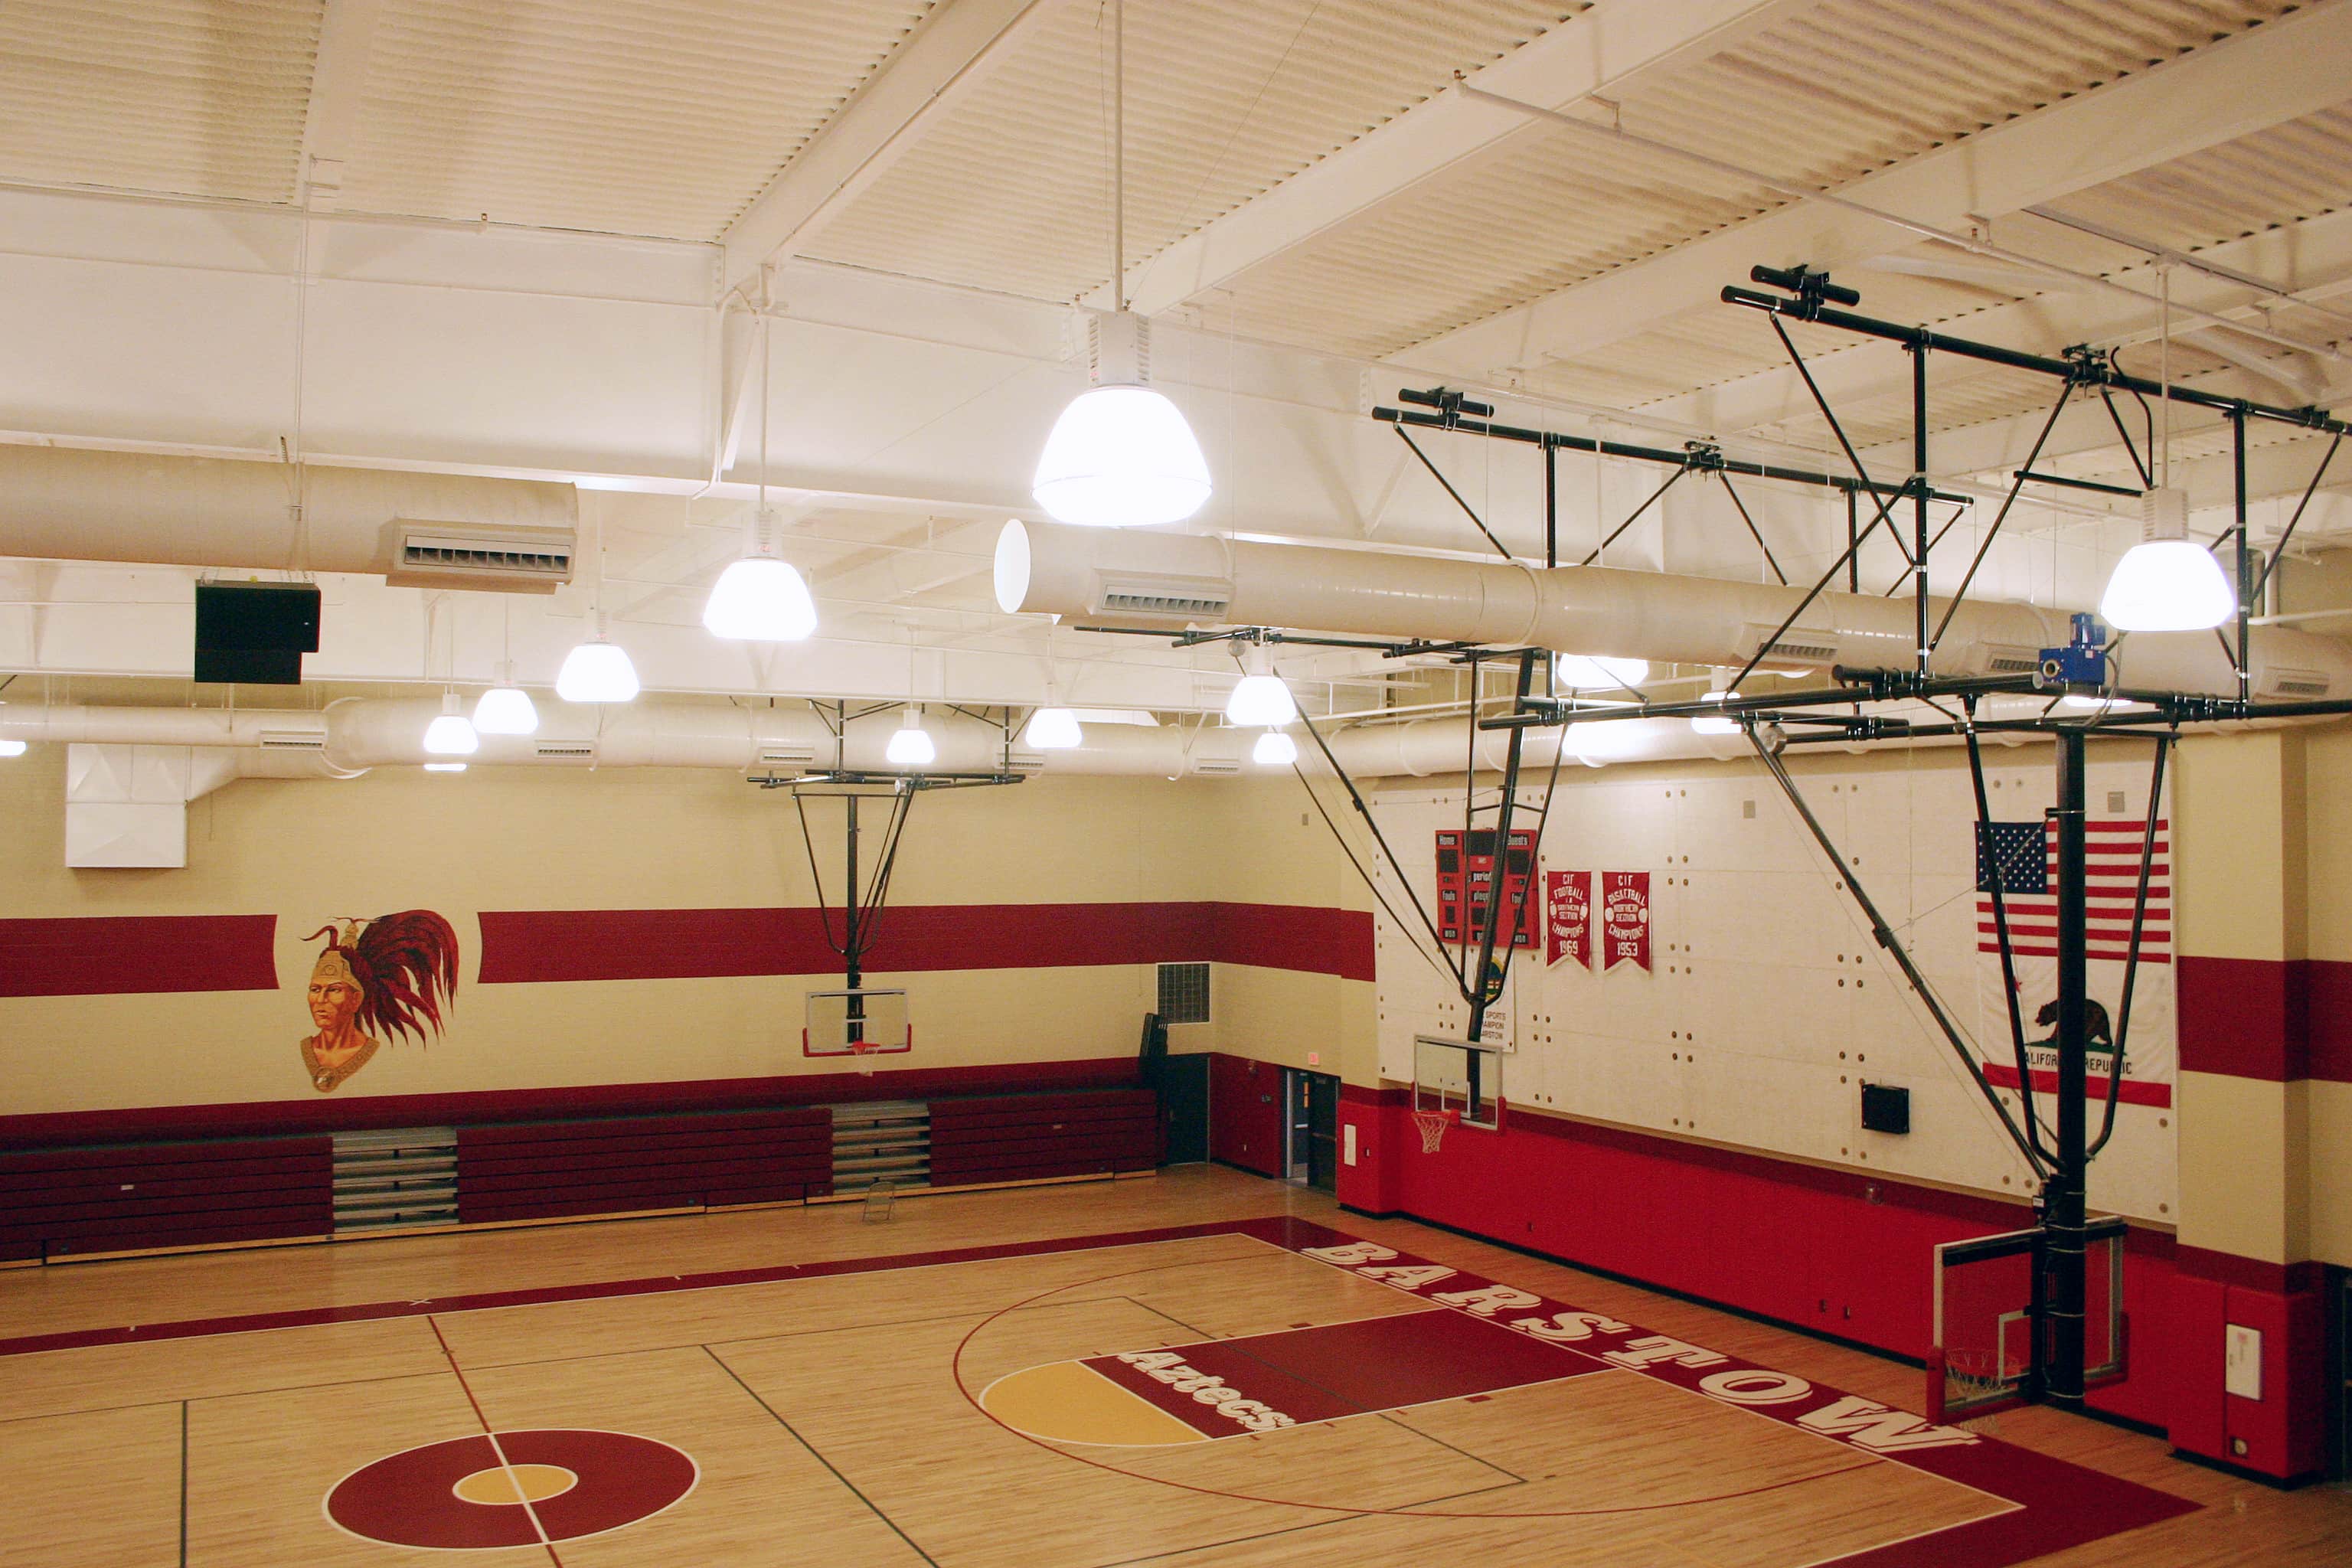 Arctic White SonaSpray “fc” on the ceiling in Barstow High School Gym